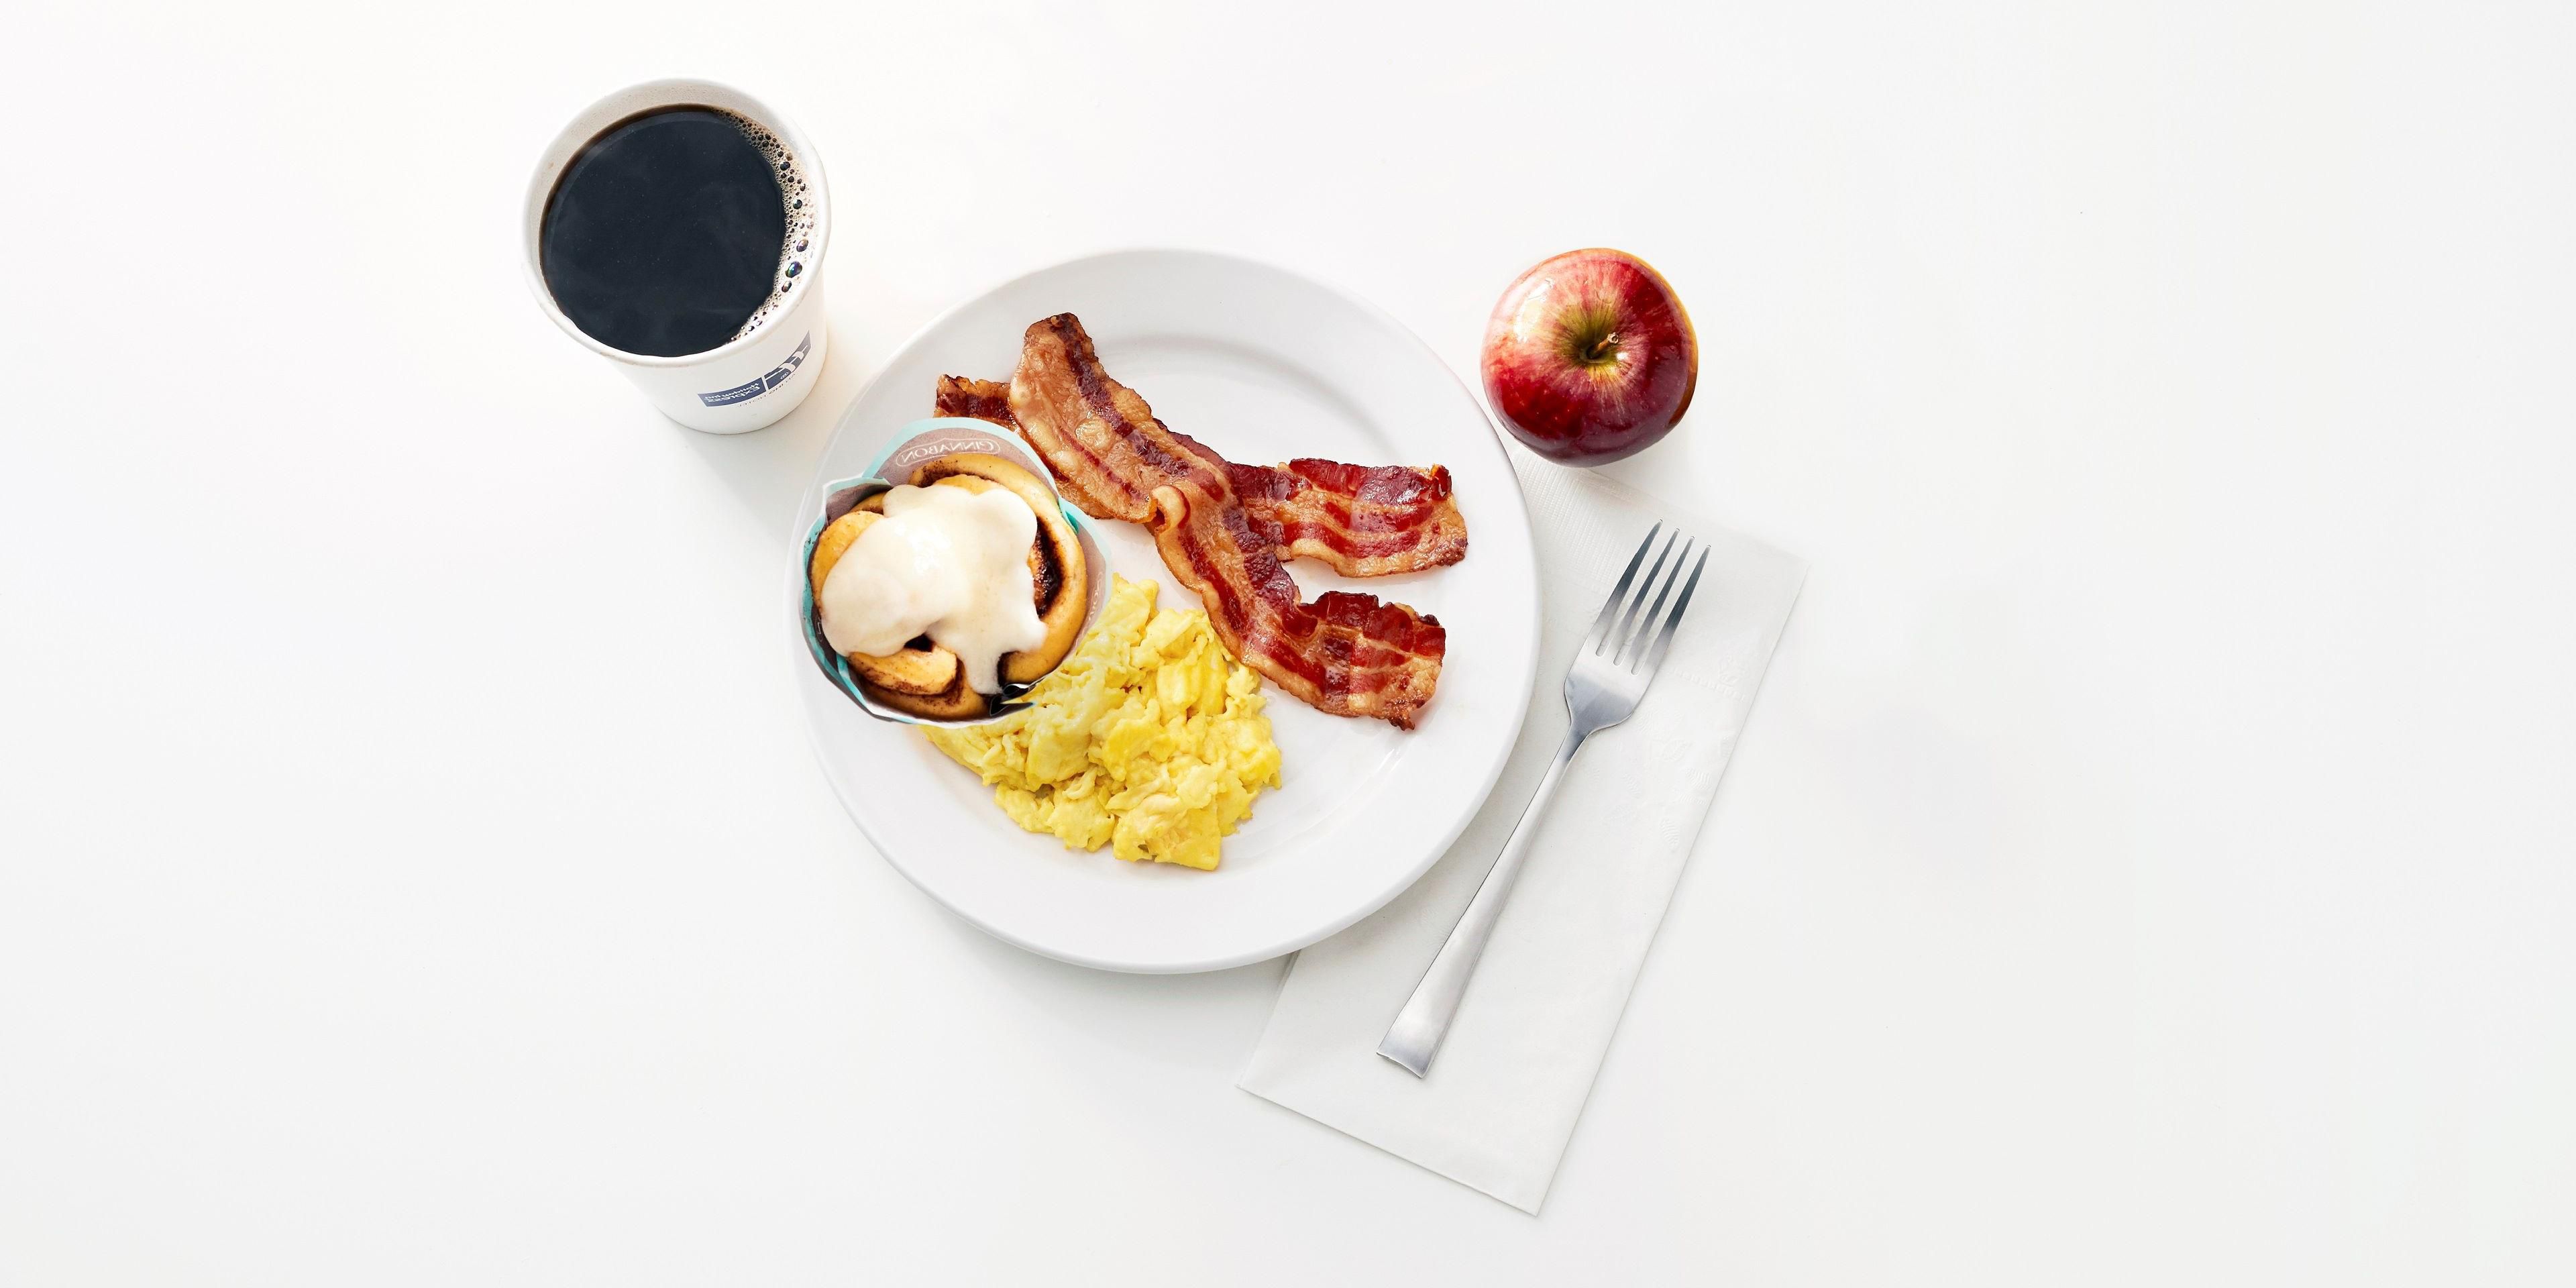 Kick start your day with our free Express Start Breakfast, with grab ‘n’ go options and favorites such as eggs and bacon, hot pancakes, our signature cinnamon rolls and fresh coffee. Offered from 6:30AM to 9AM.